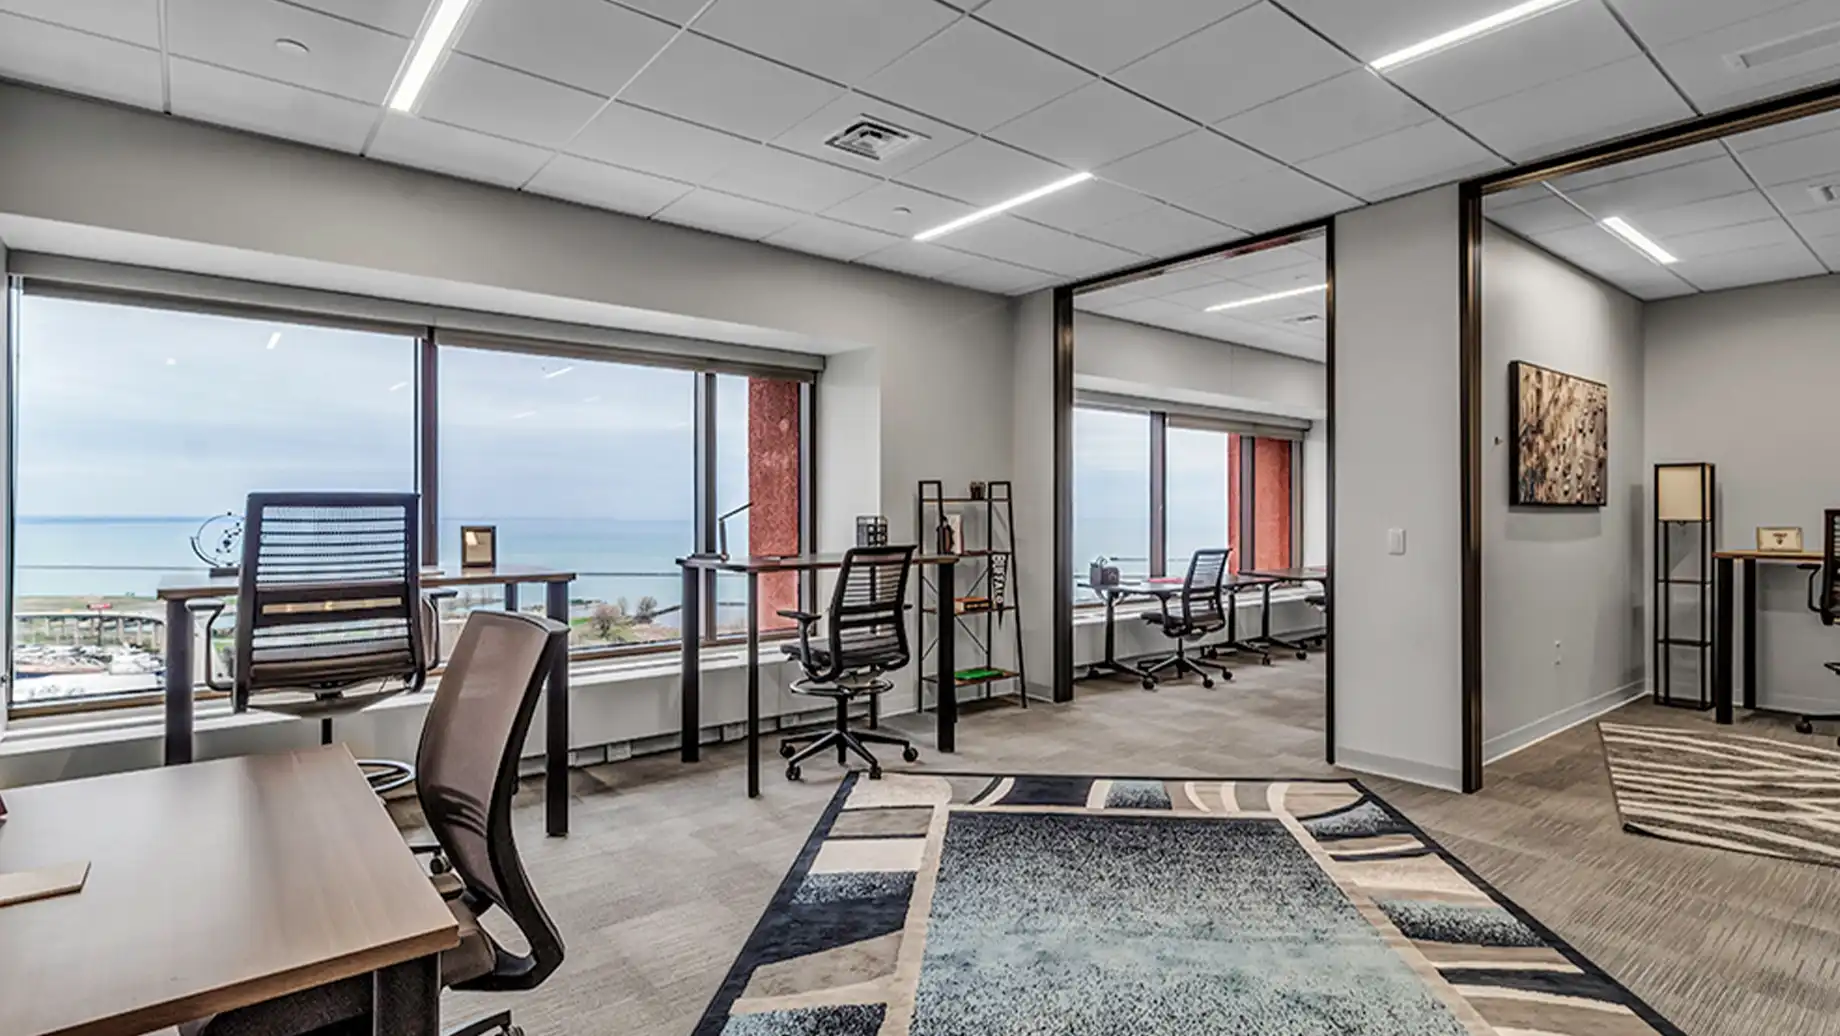 Buffalo Seneca One Private Office & Coworking Space, Private Team Room with views to outside.